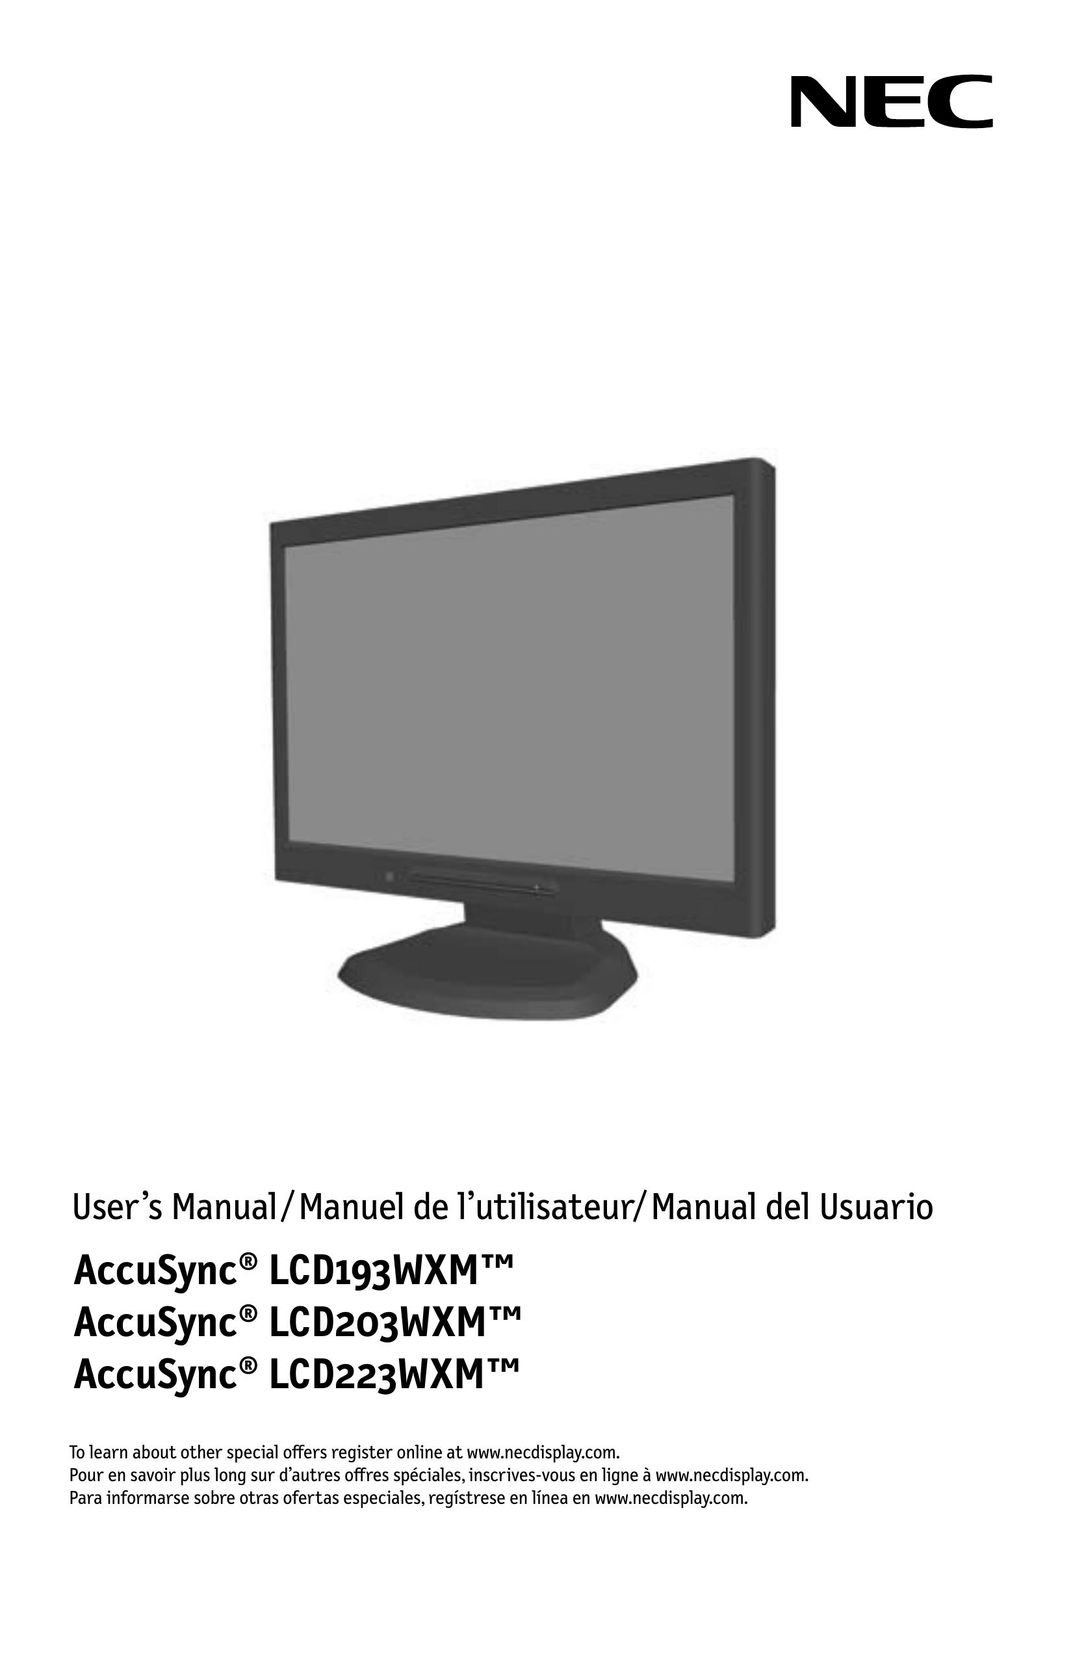 NEC LCD193WXM Flat Panel Television User Manual